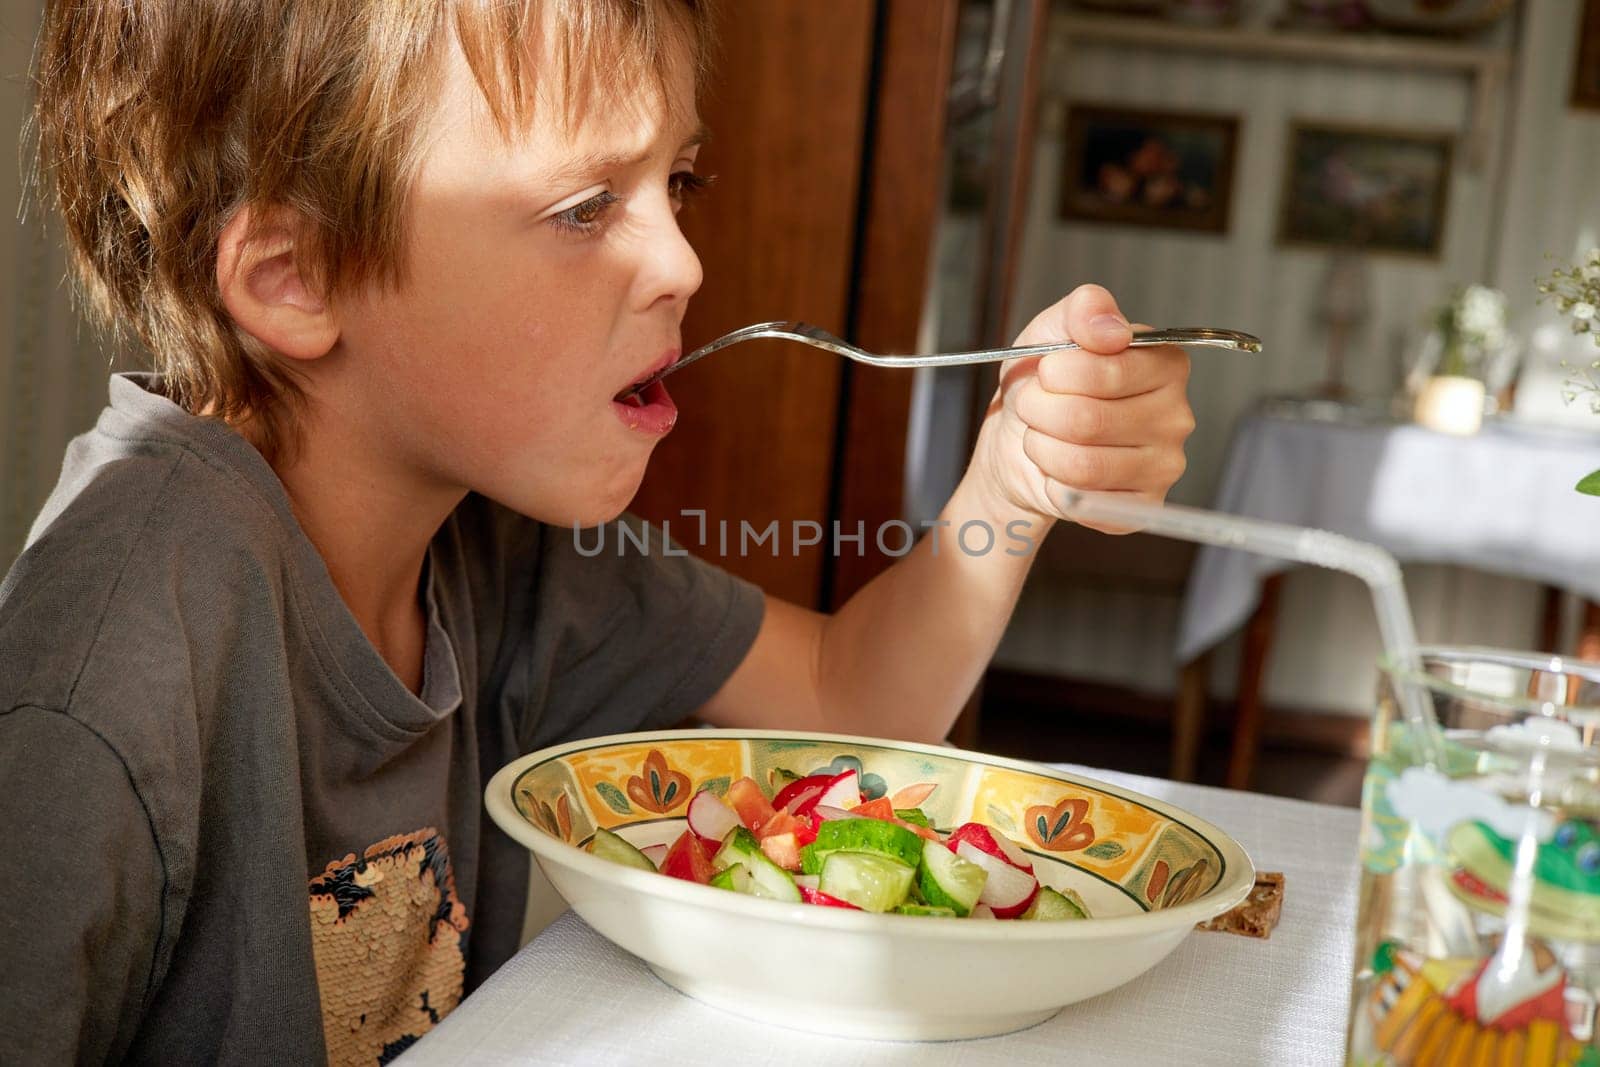 Hungry boy eats vegetable salad at table in country house by Demkat